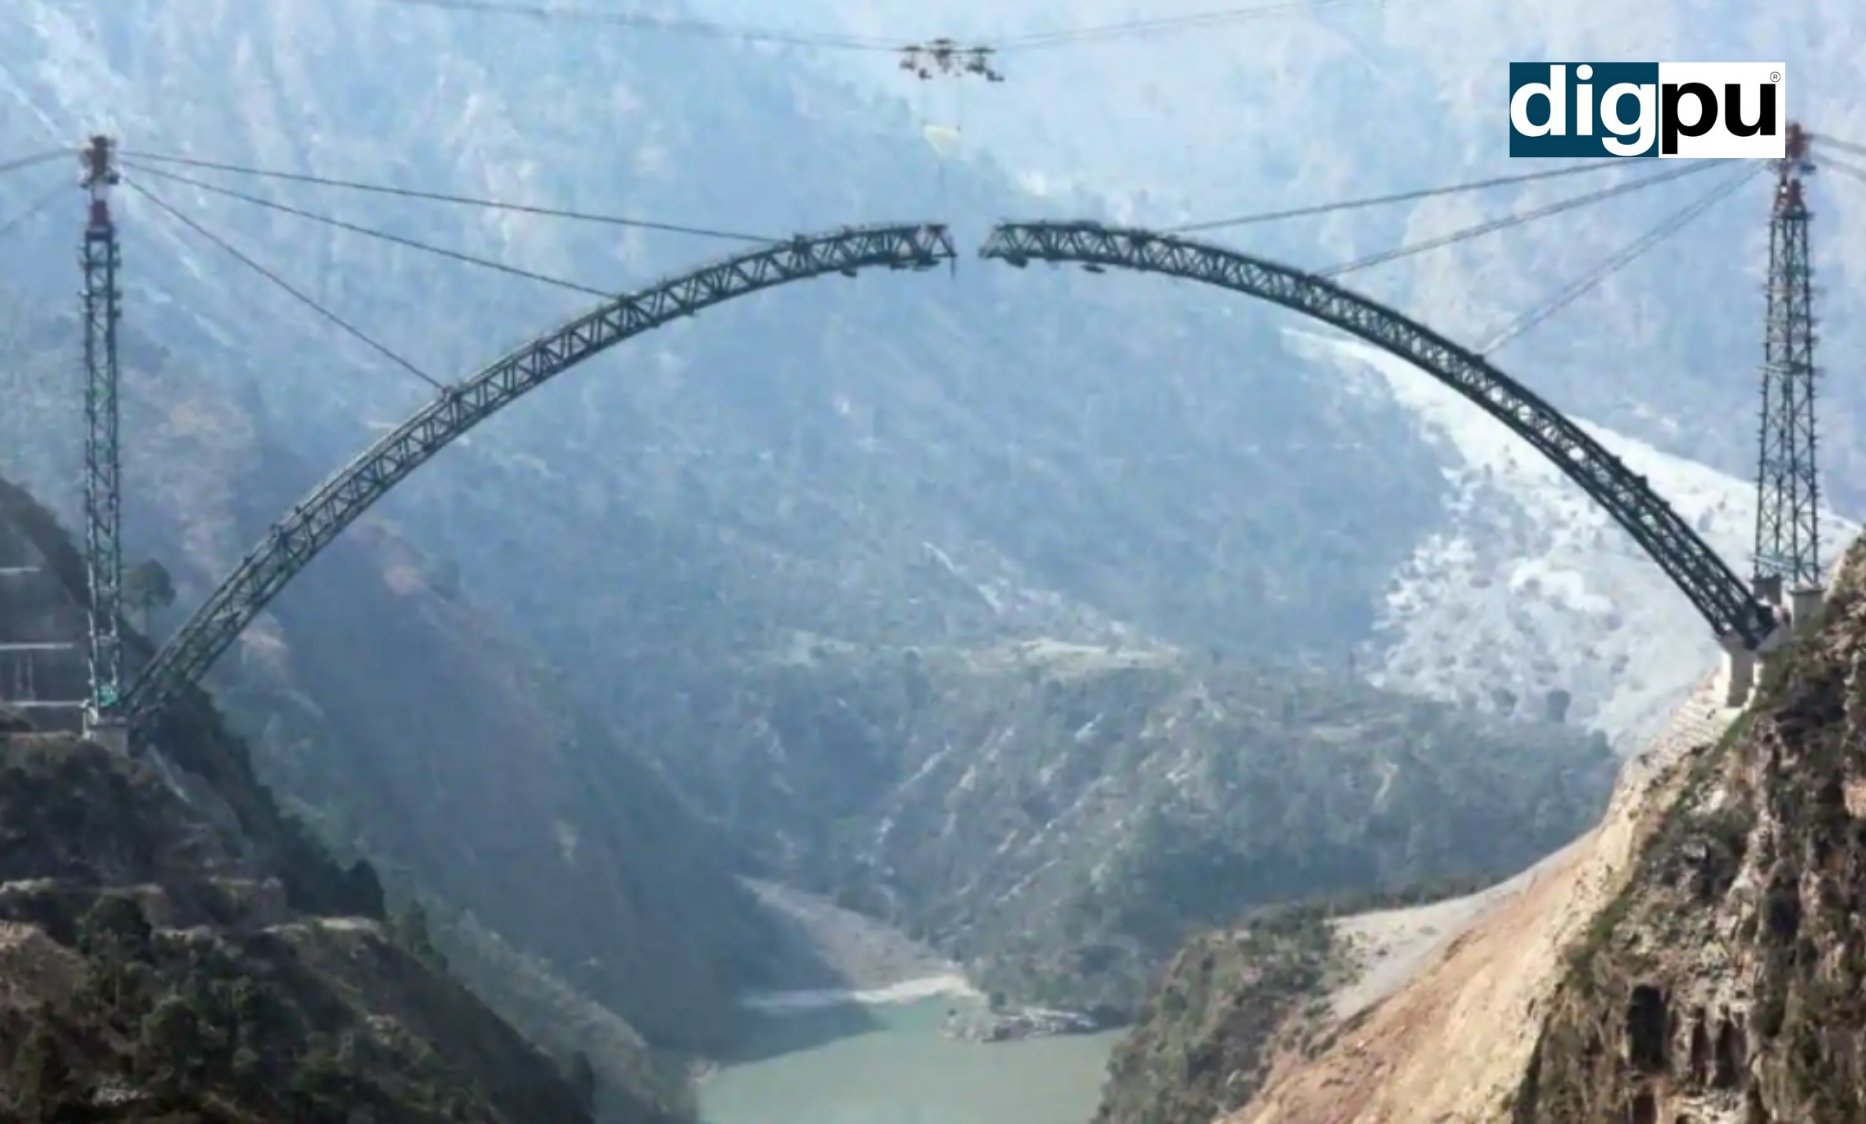 Arch of world’s tallest railway bridge on Chenab River completed in J&K - Digpu News